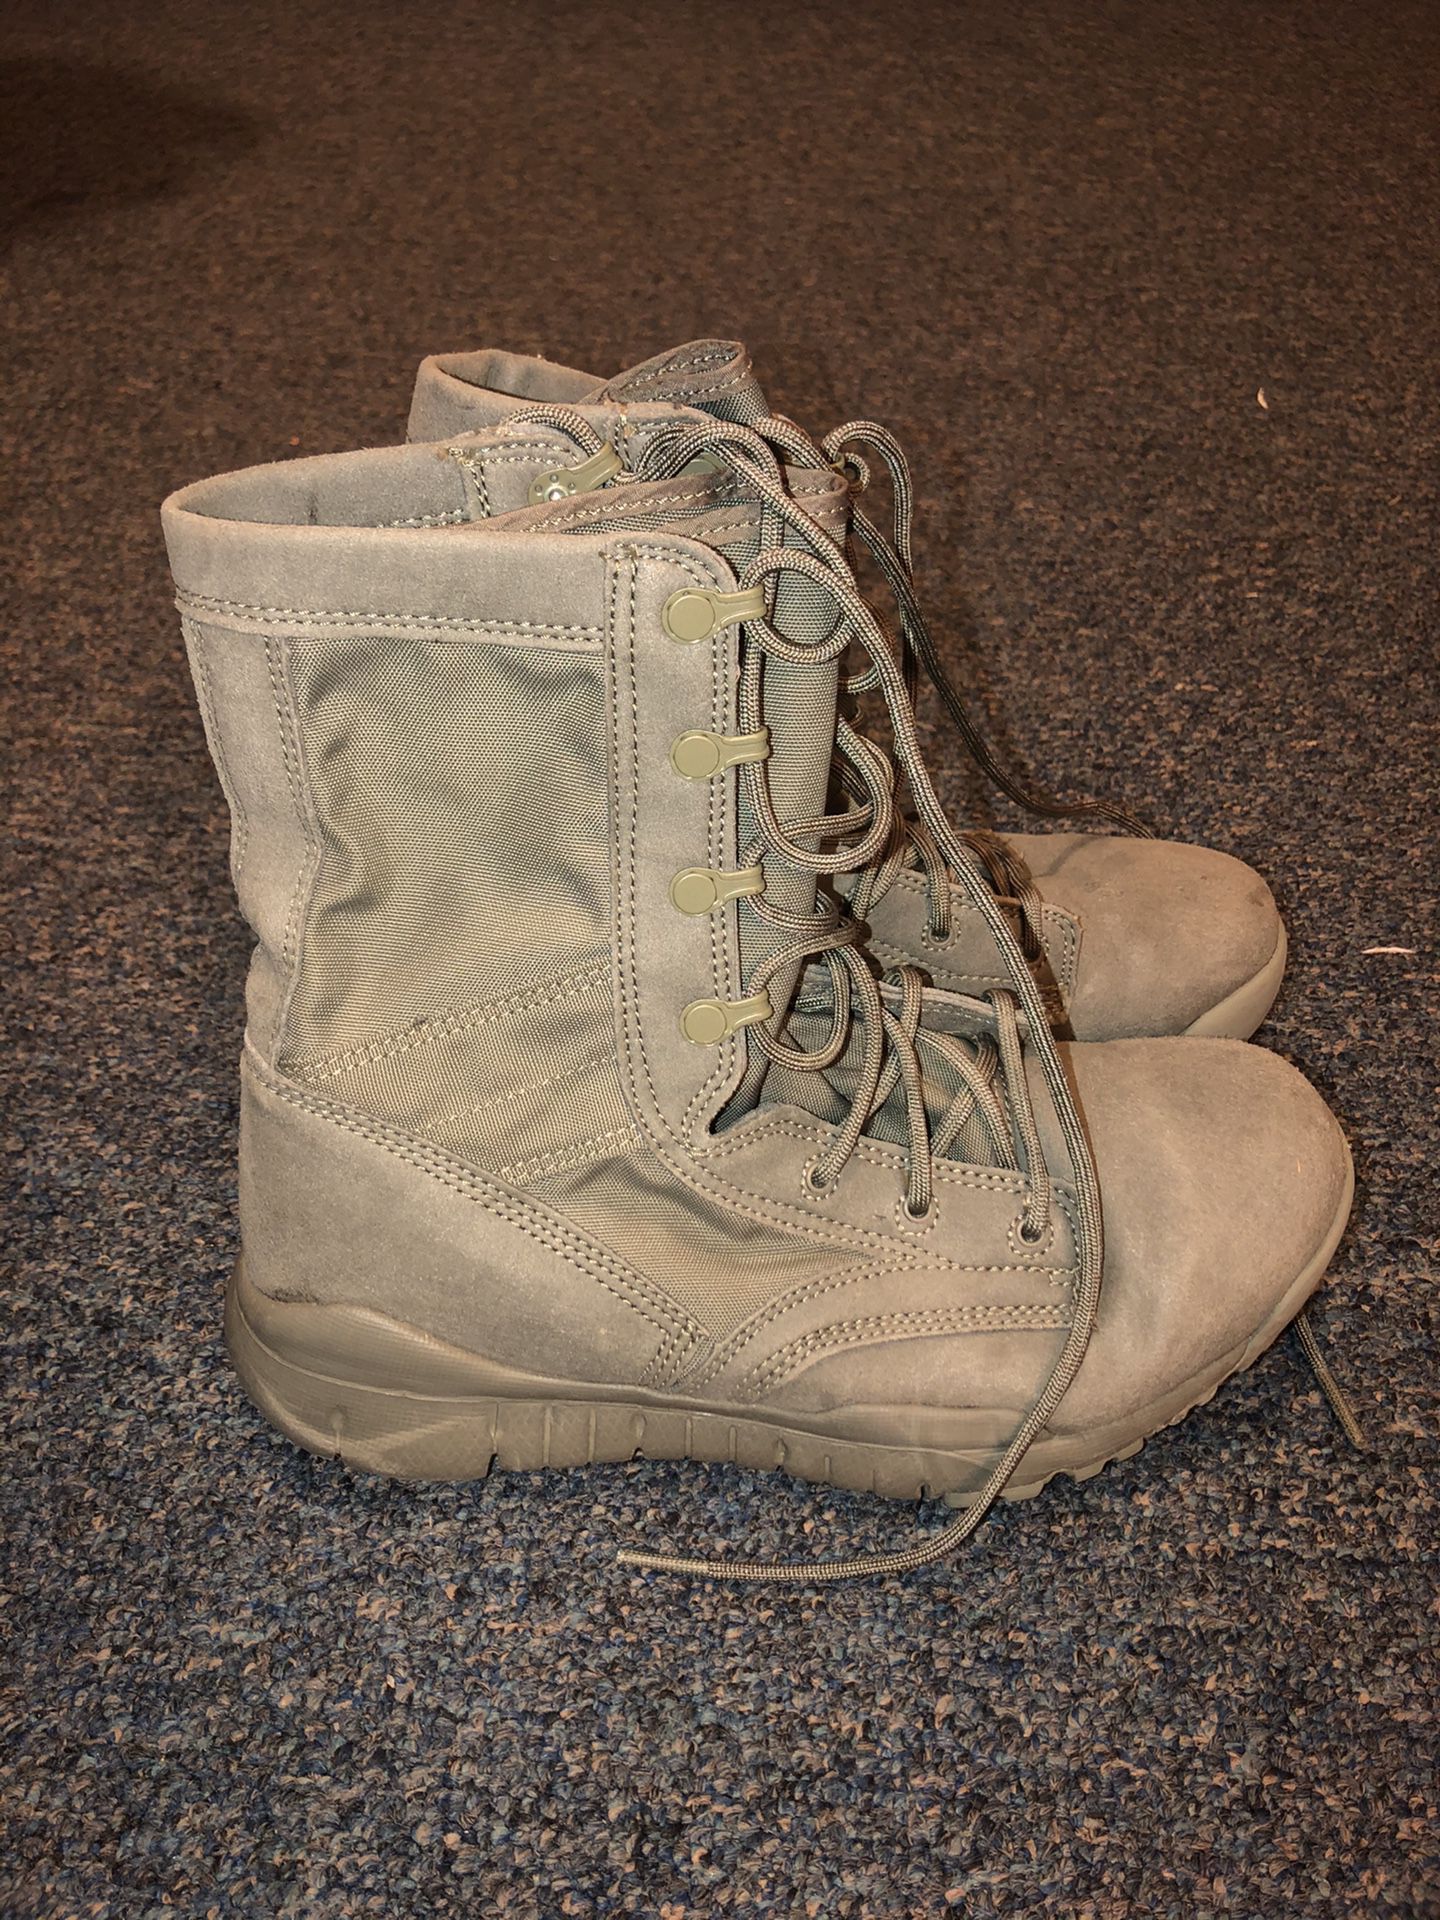 Nike military boots